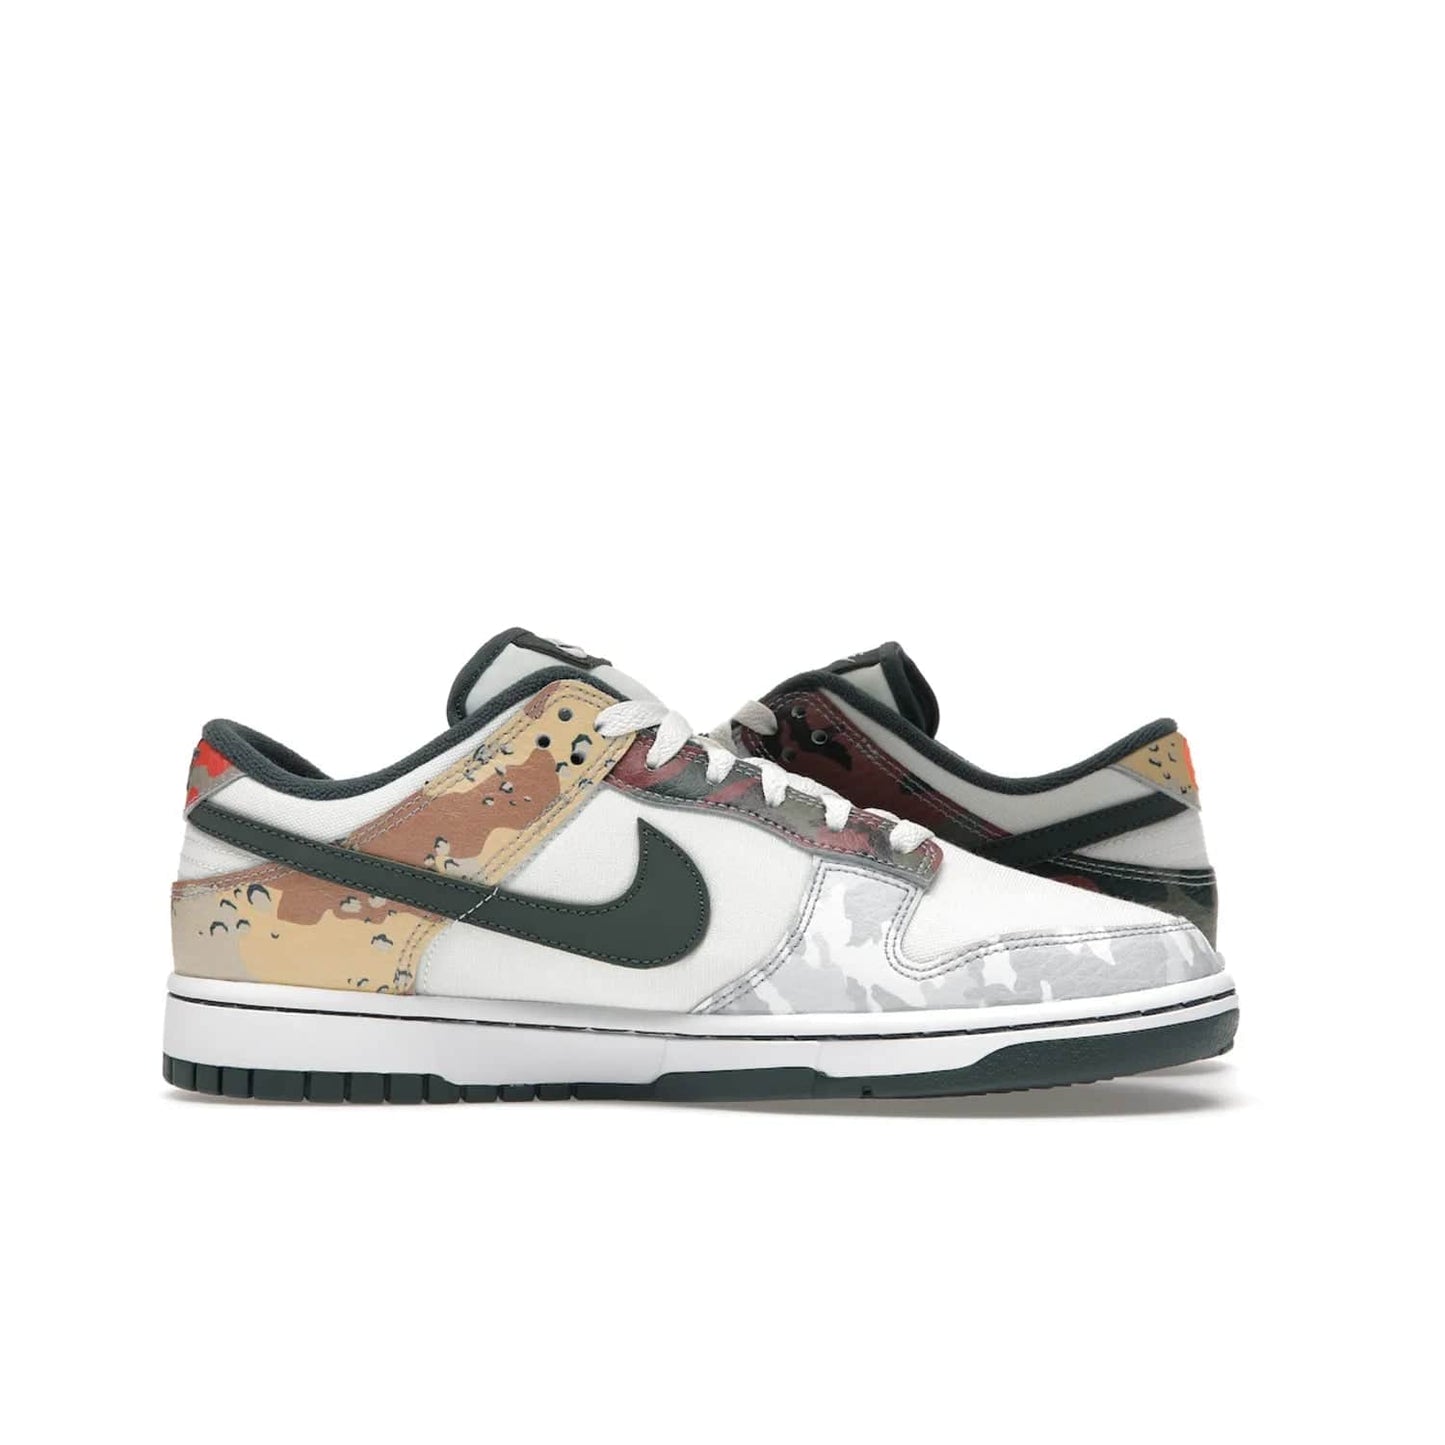 Nike Dunk Low SE Sail Multi-Camo - Image 20 - Only at www.BallersClubKickz.com - Classic design meets statement style in the Nike Dunk Low SE Sail Multi-Camo. White leather base with multi-color camo overlays, vibrant Nike Swooshes, and orange Nike embroidery. Get yours August 2021.